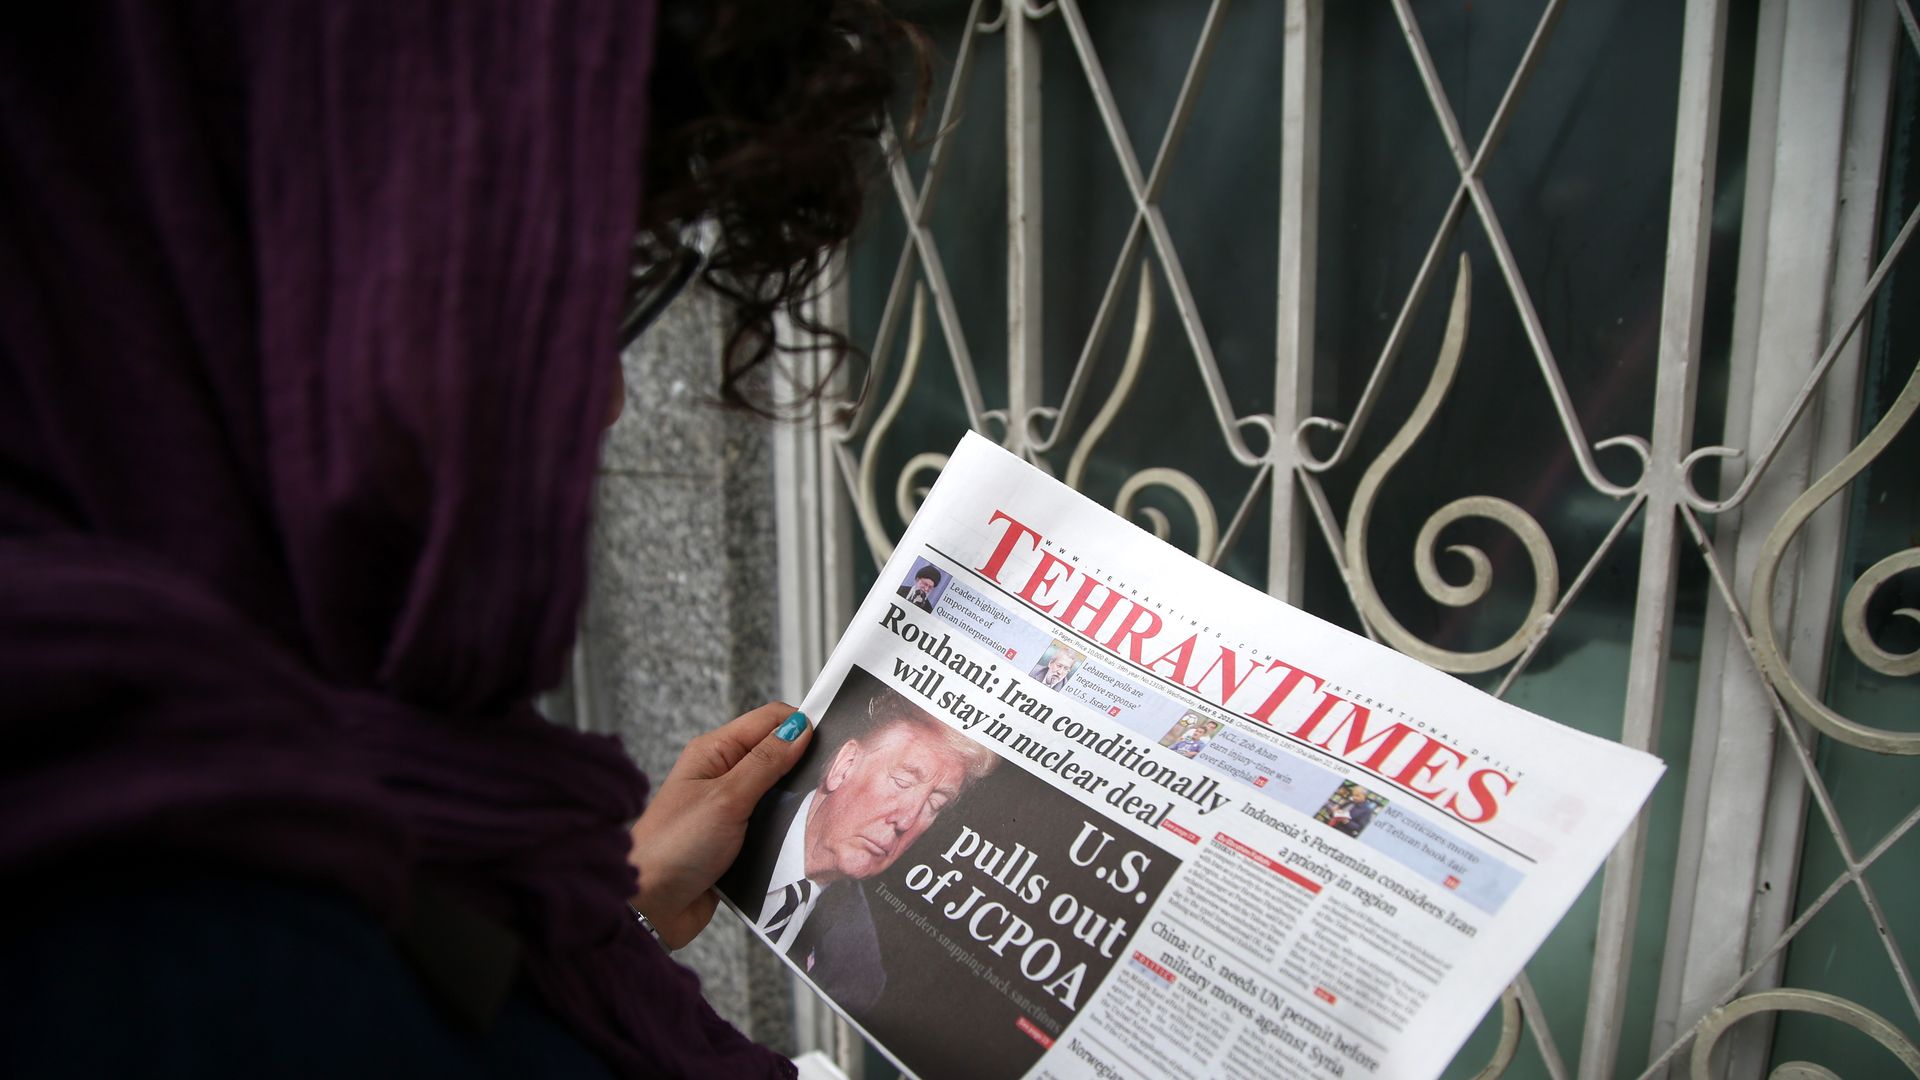 A woman reads Tehran Times on May 9, 2018 in Tehran, Iran. US President Donald Trump announced 'withdrawal' from Iran nuclear deal on May 9, 2018.